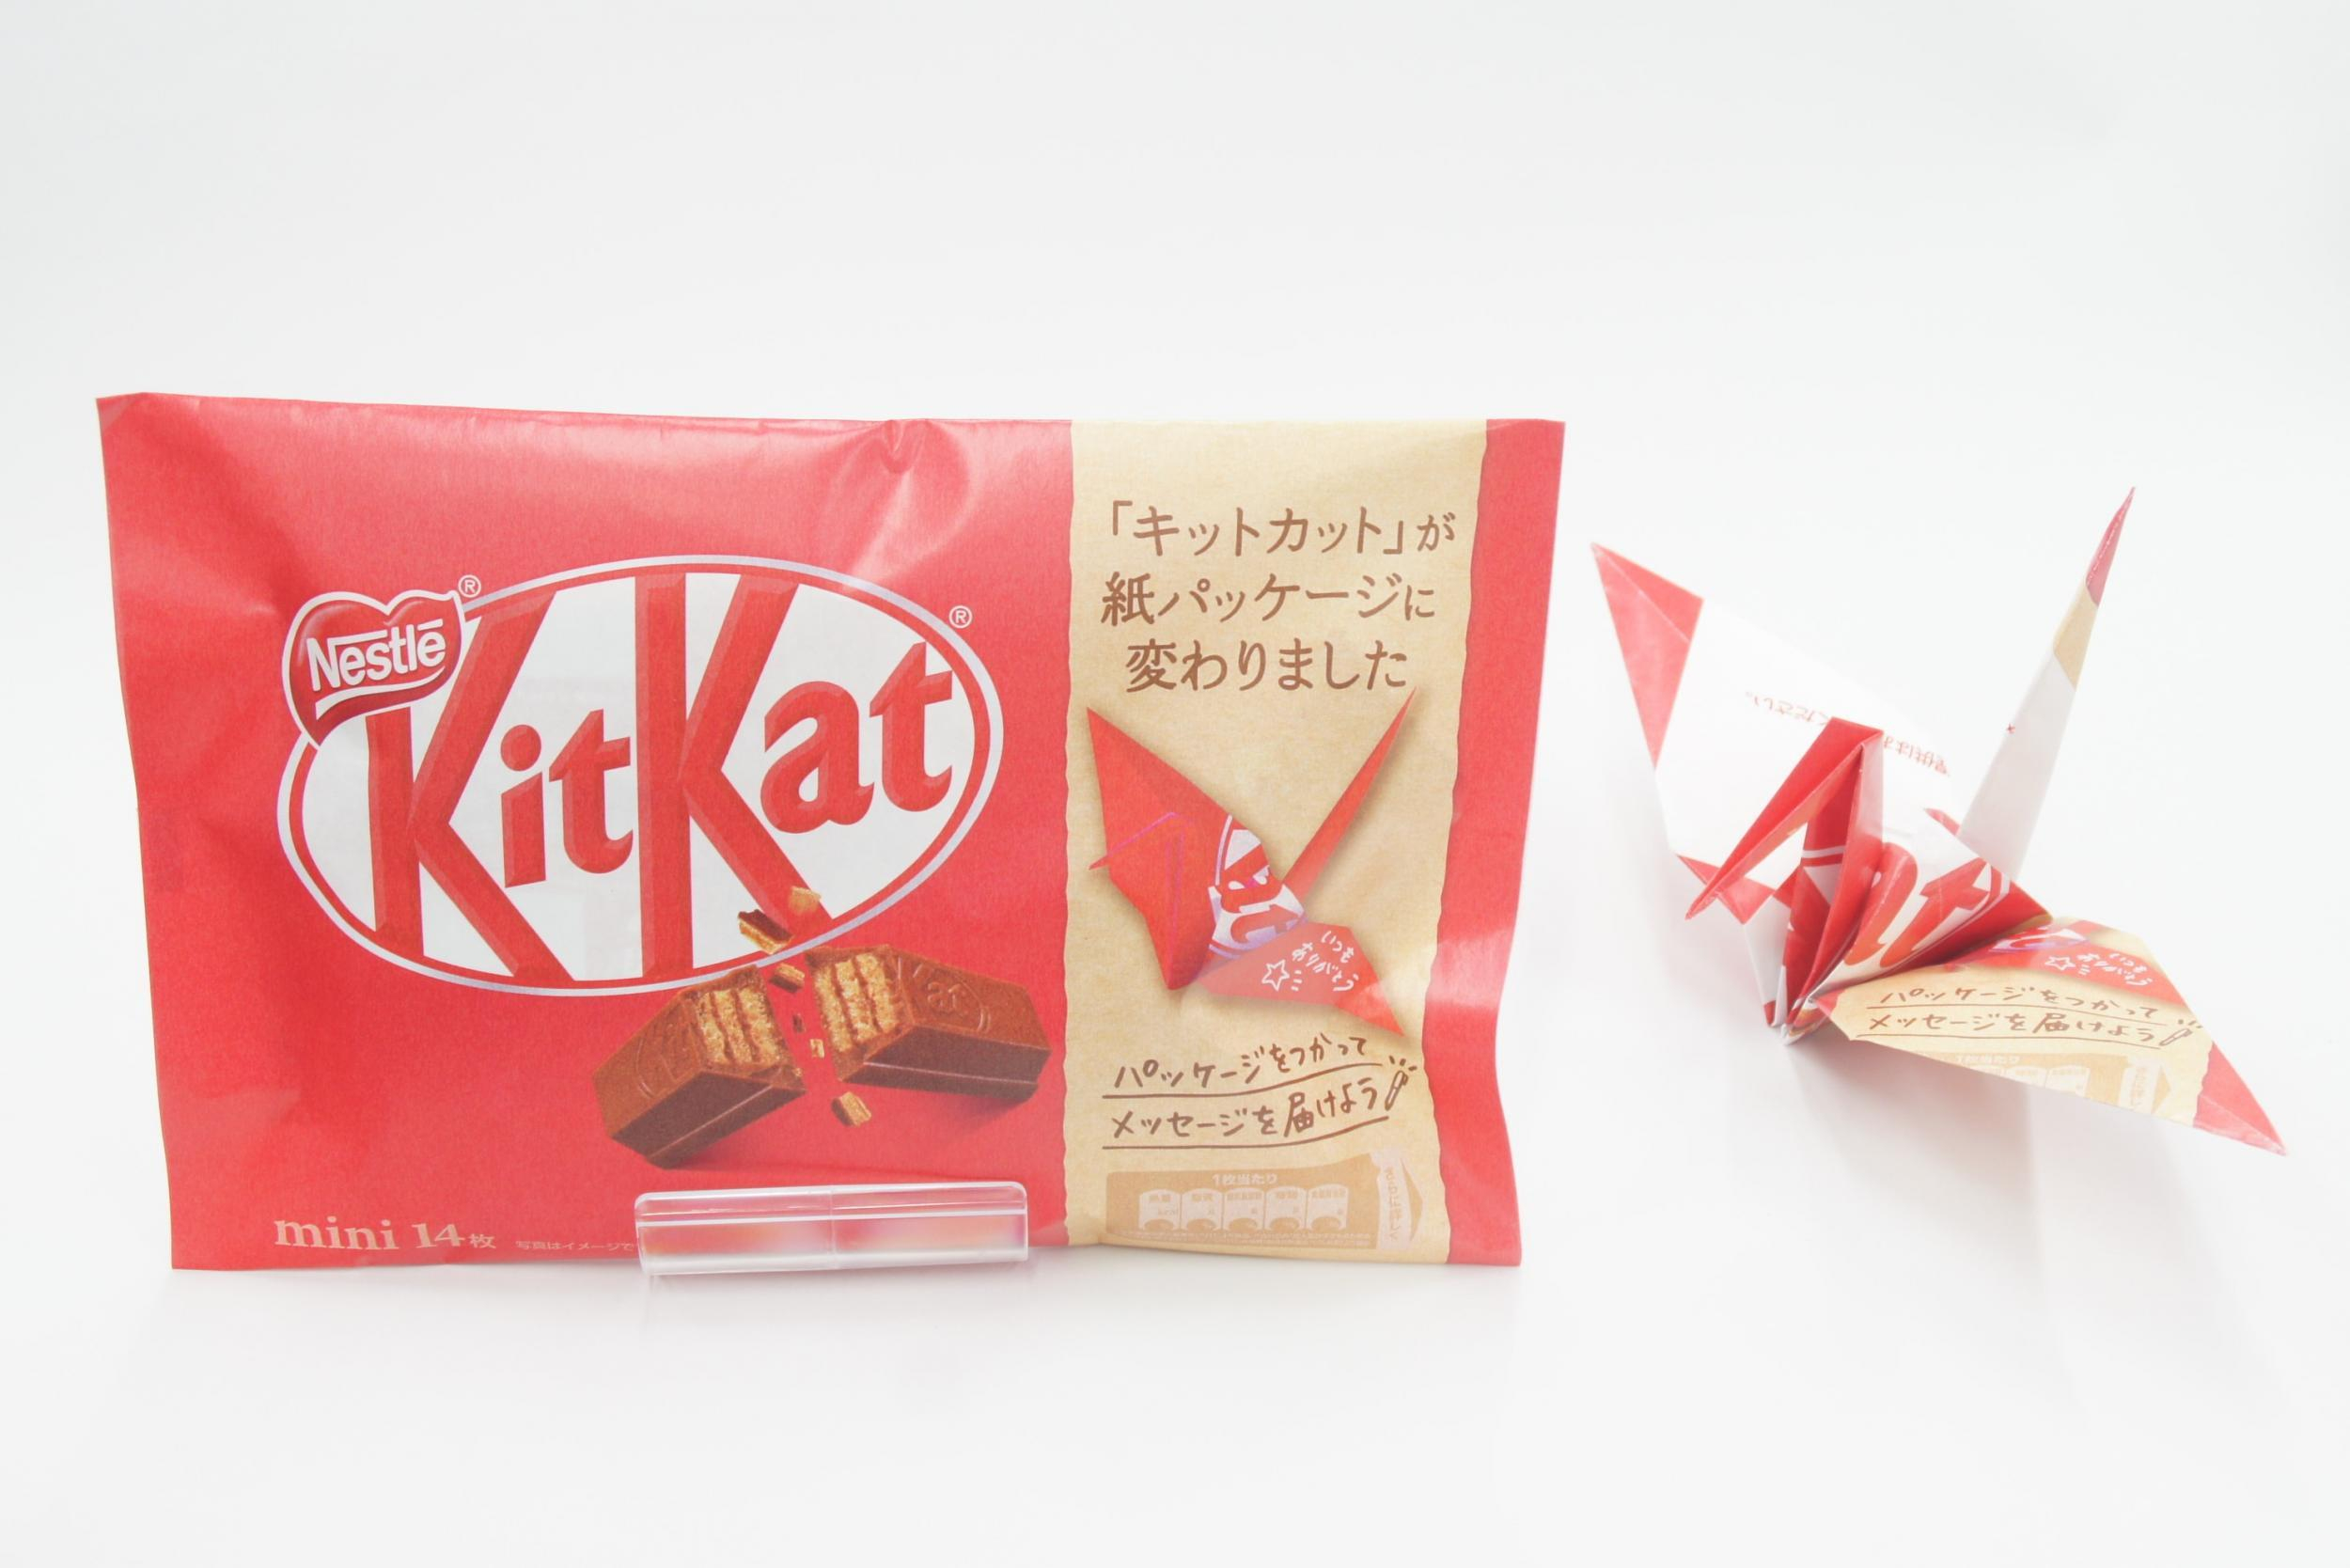 What Is Origami Paper Kitkat Japan To Use Paper Packaging That Can Be Folded Into Origami